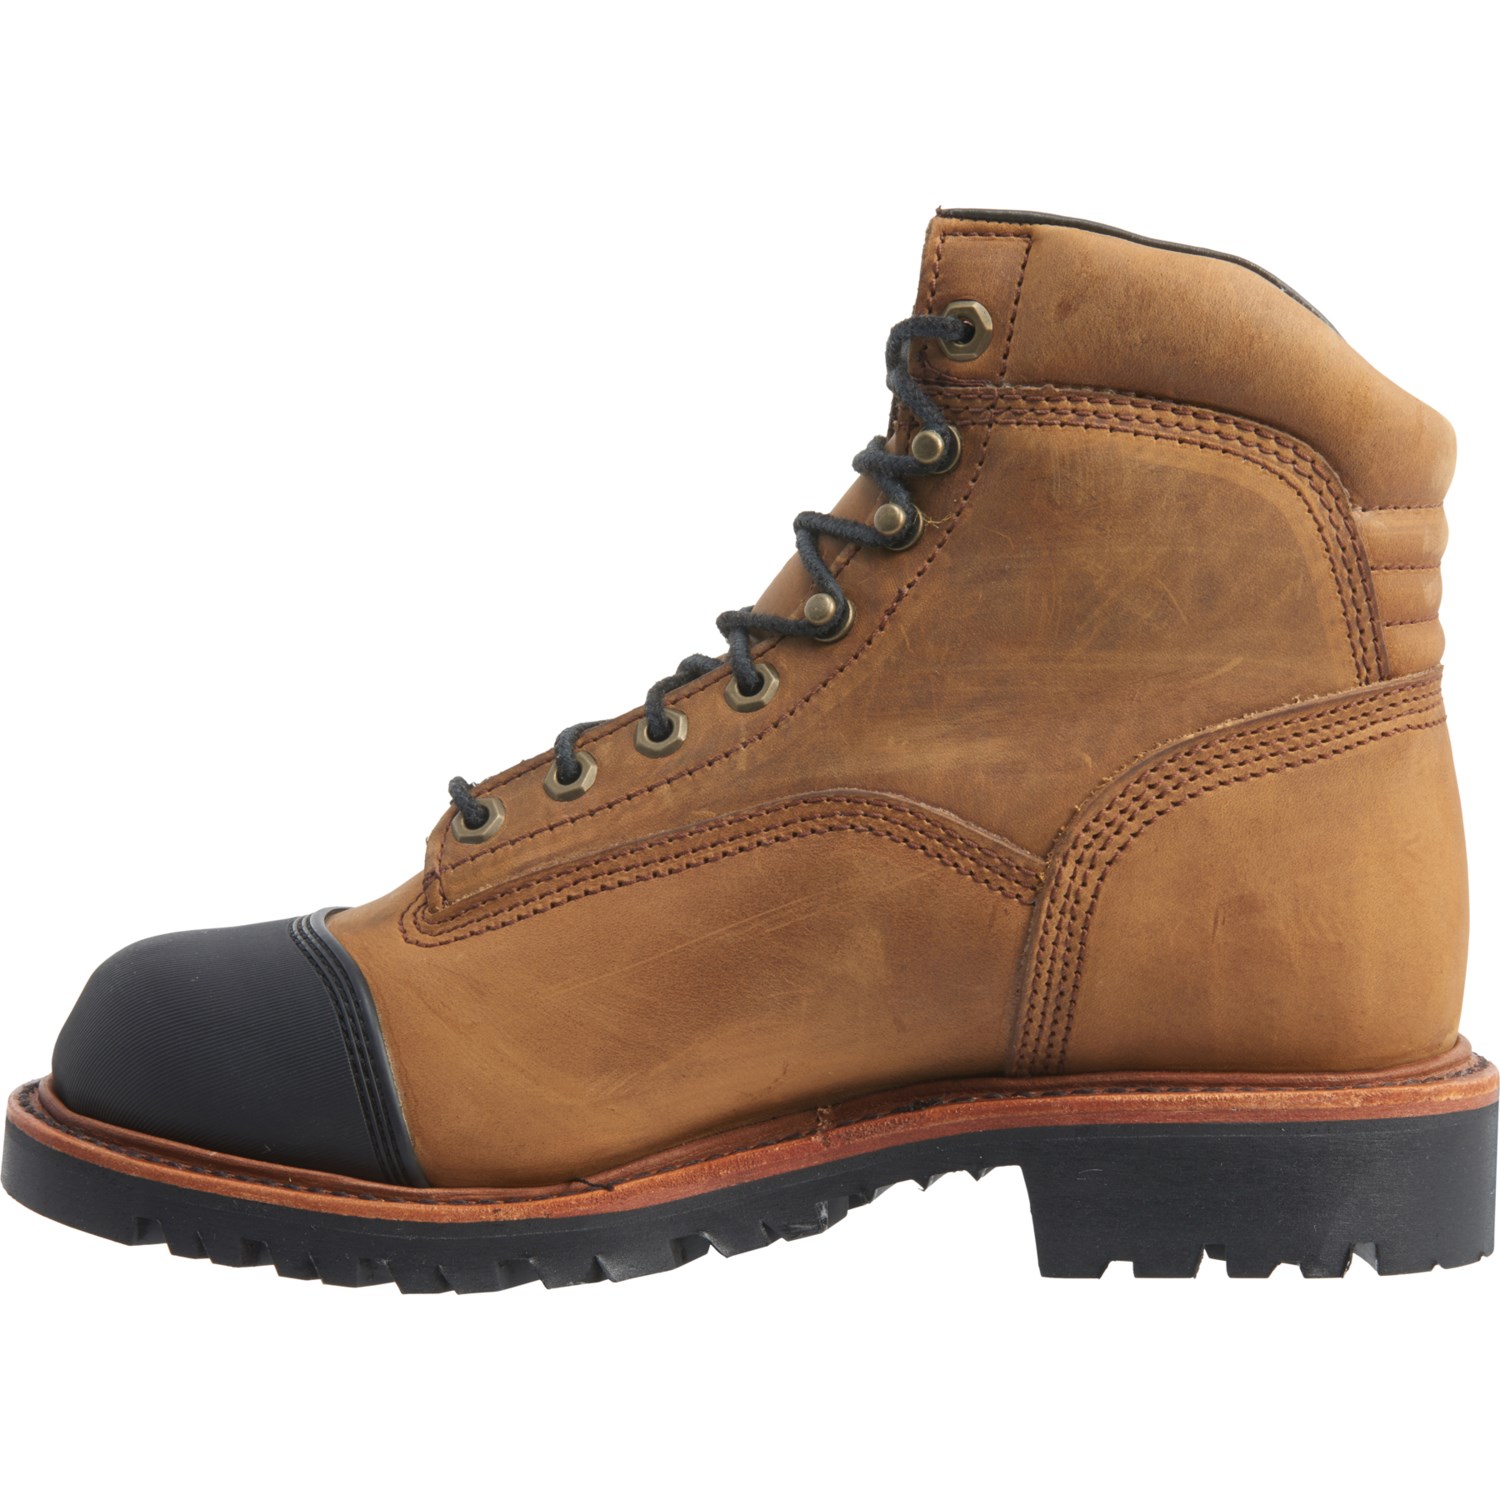 Chippewa 6” Bolger Work Boots (For Men 